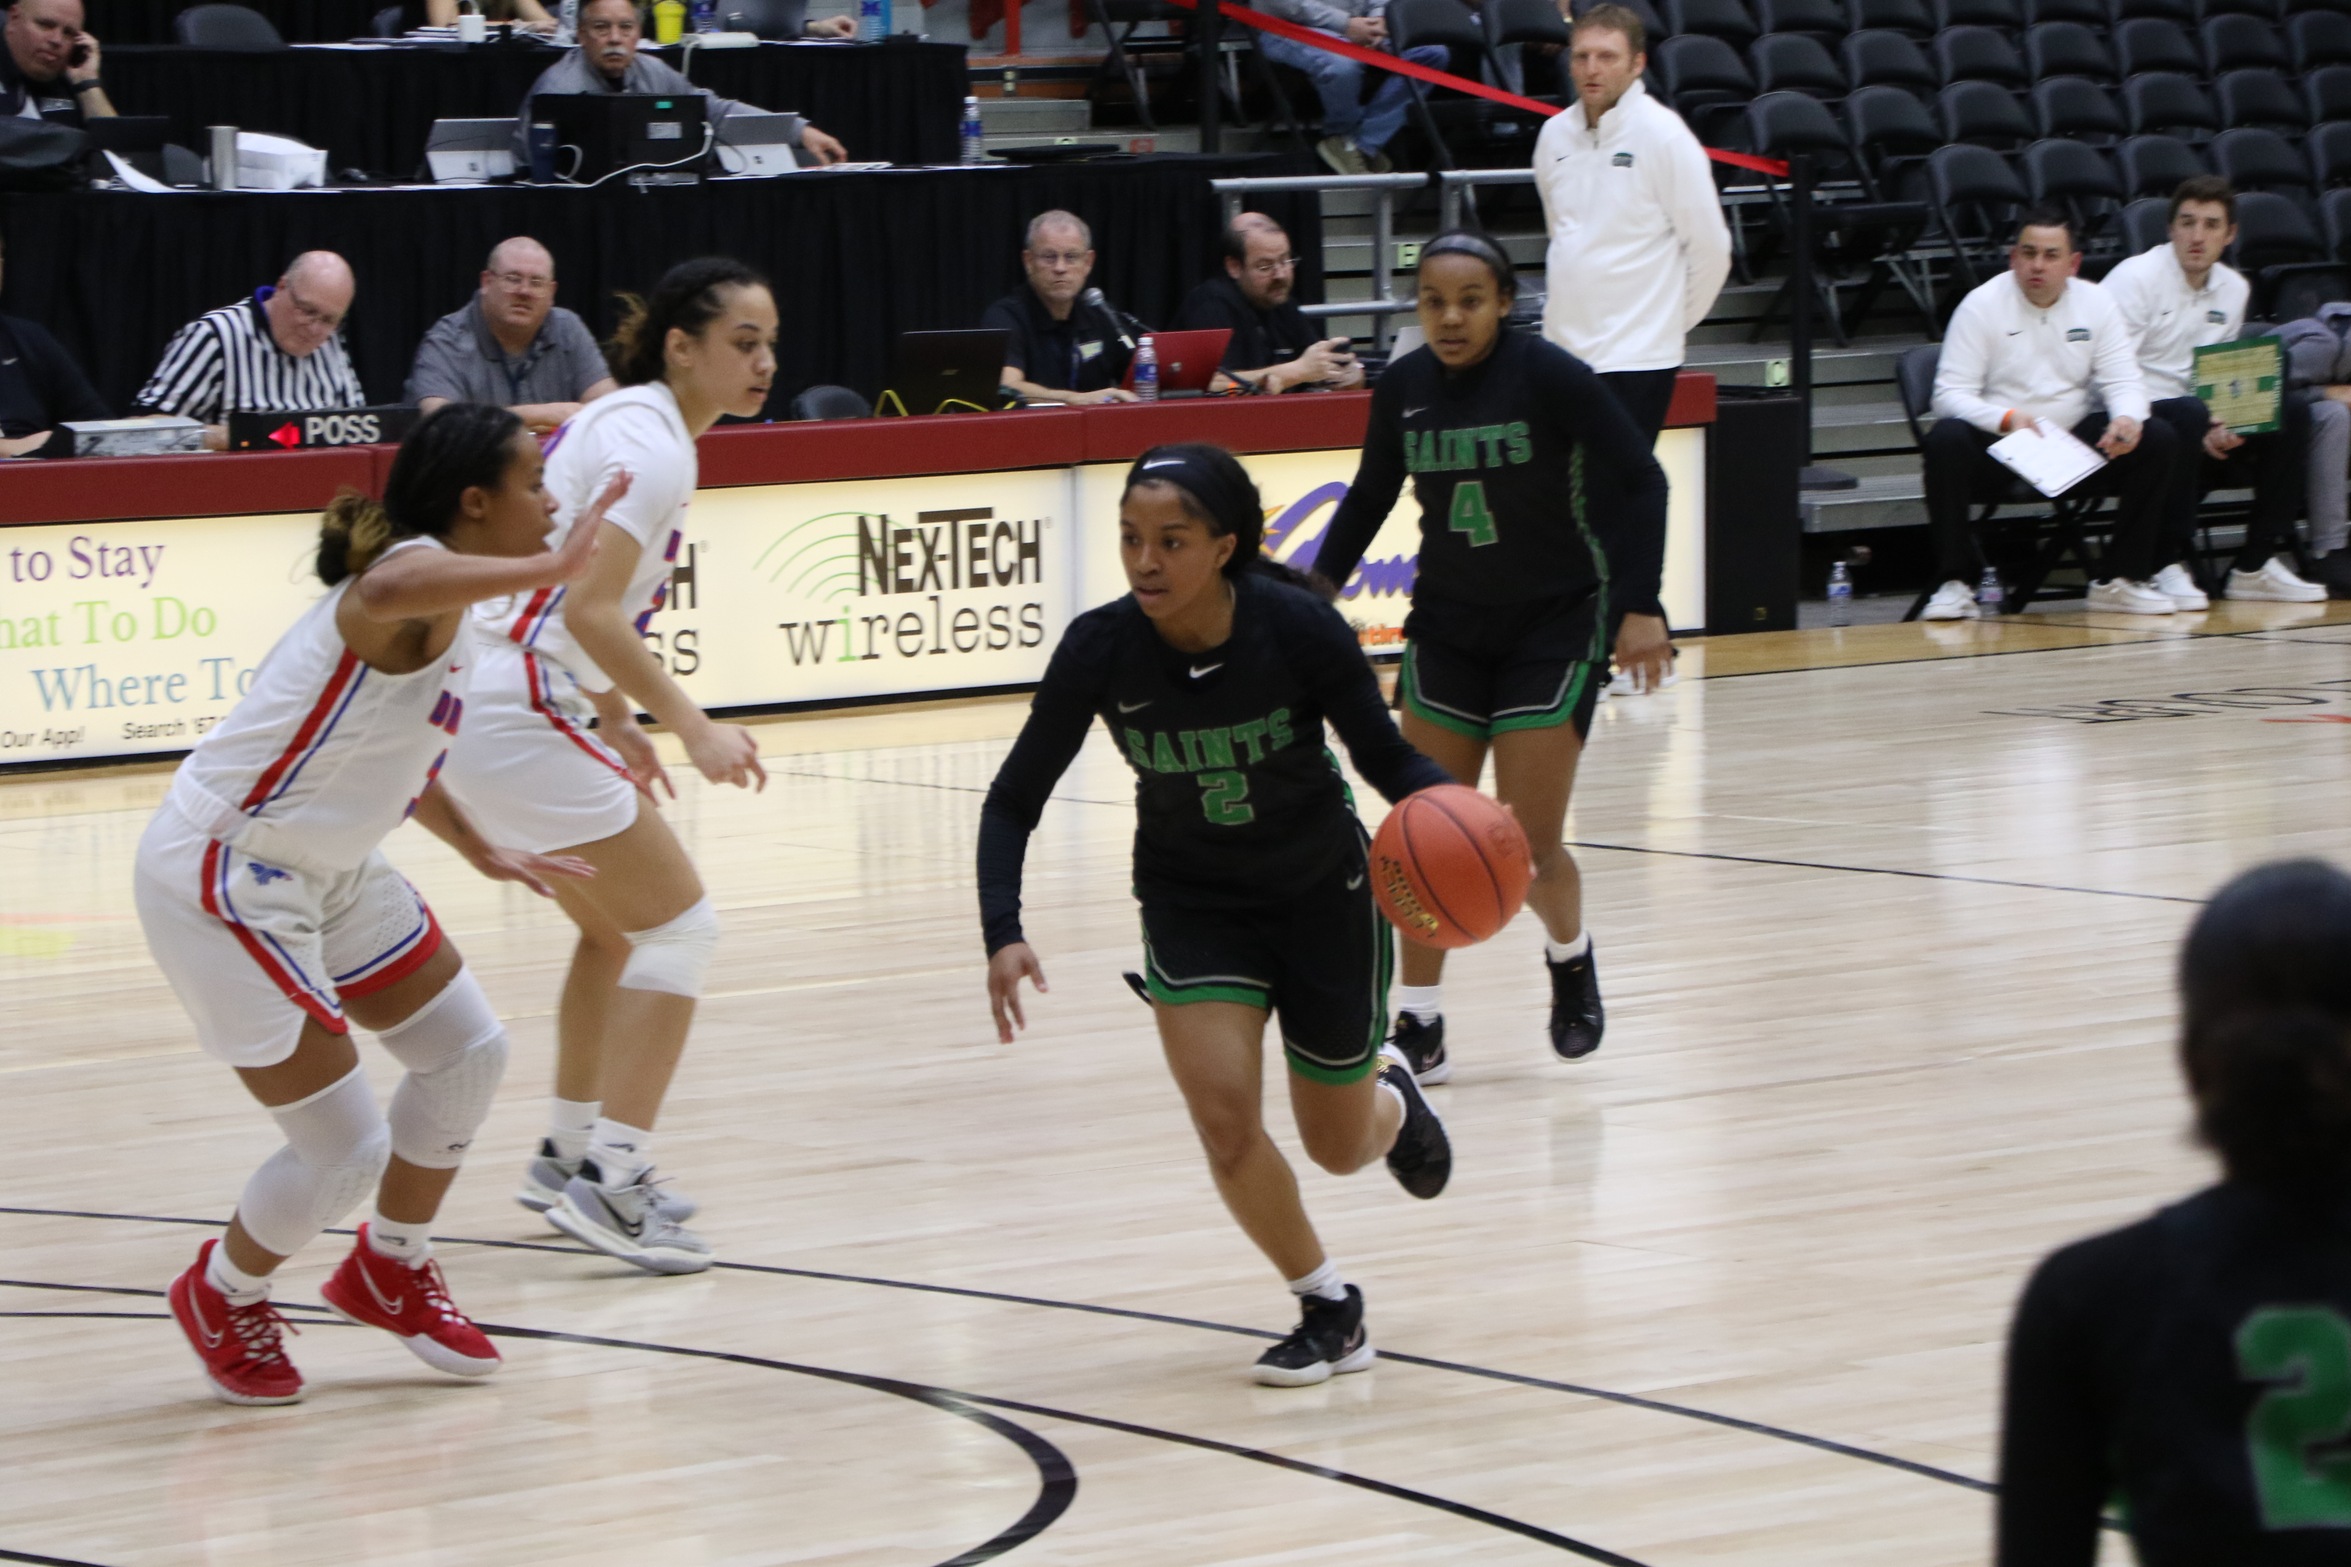 The Lady Saints fall in the Region VI Semifinals to Hutchinson